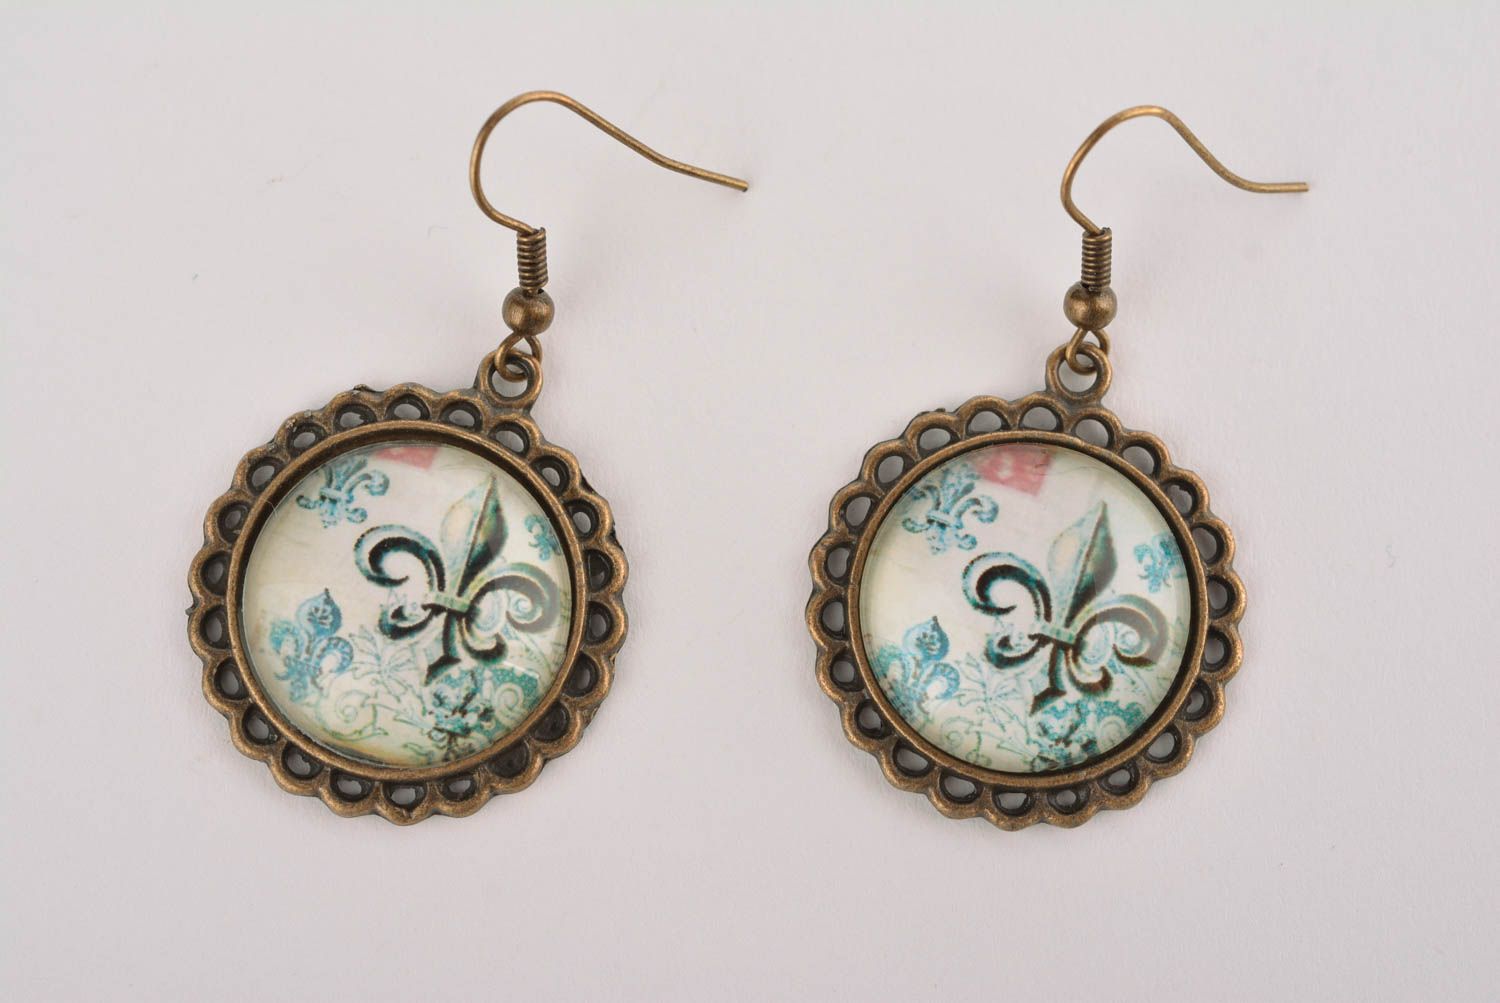 Unusual handmade metal earrings design glass jewelry designs gifts for her photo 4